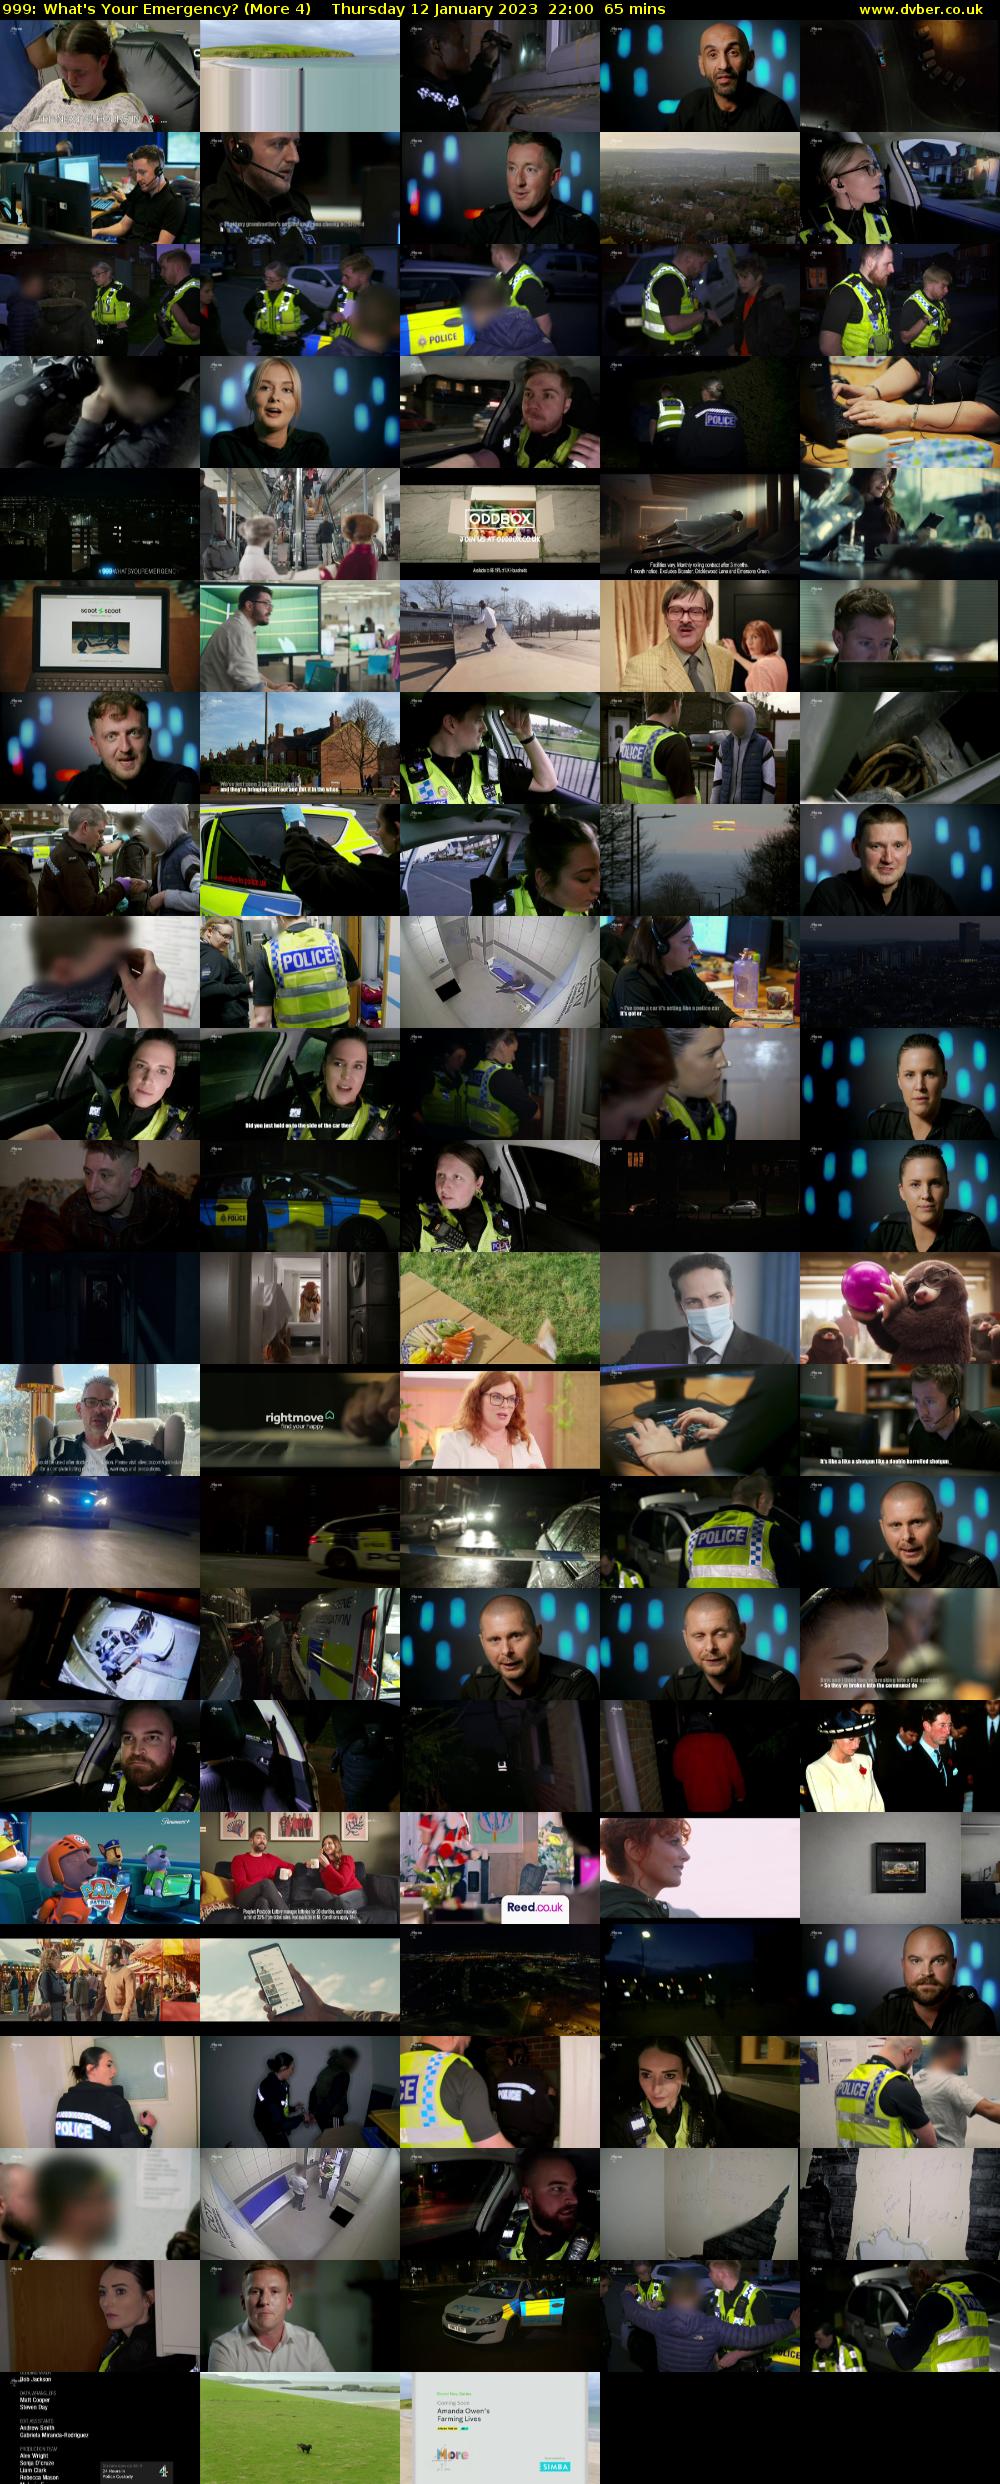 999: What's Your Emergency? (More 4) Thursday 12 January 2023 22:00 - 23:05